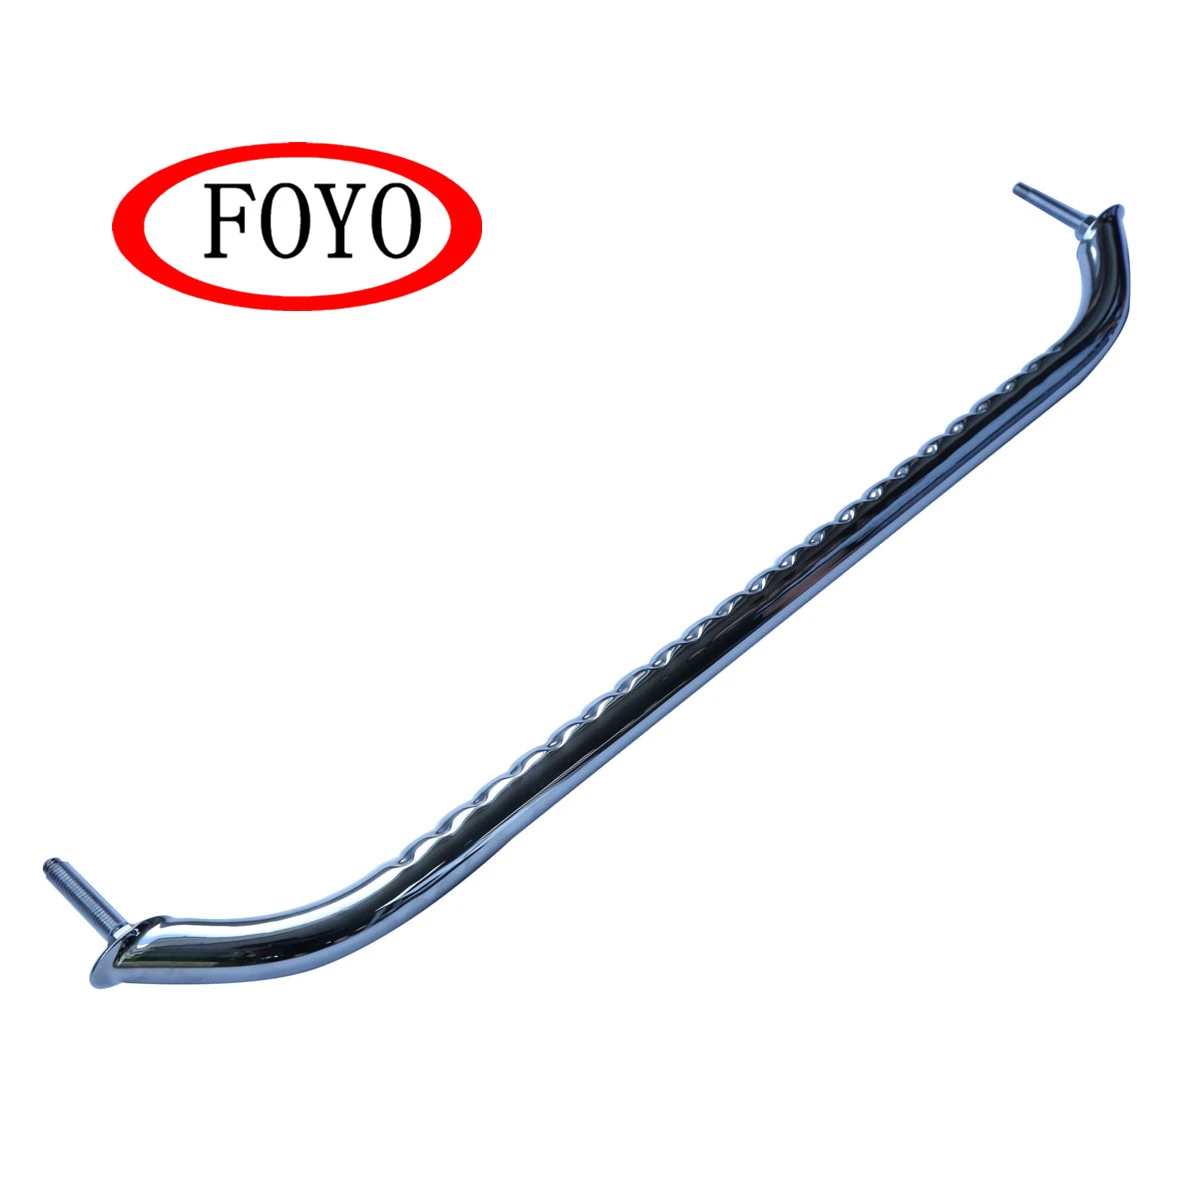 FOYO Marine Polished Hardware Replacement Part Stainless Steel Handrai with Wave Curve Grab Handle